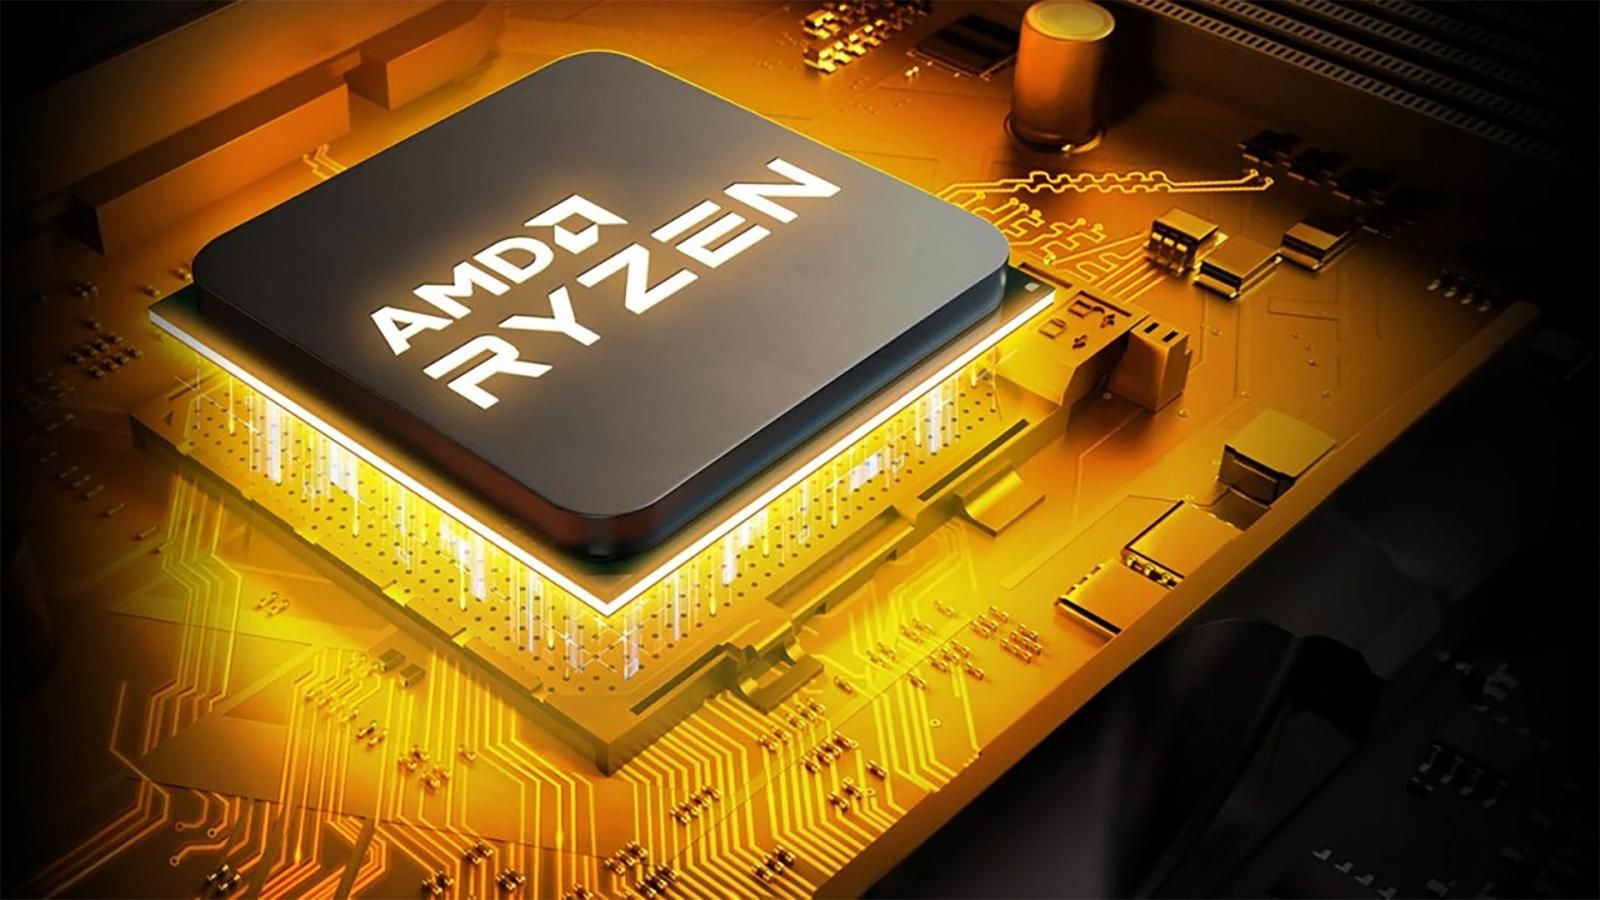 Zen 4D could be AMD’s 12th Gen Intel Core like chip with hybrid architecture